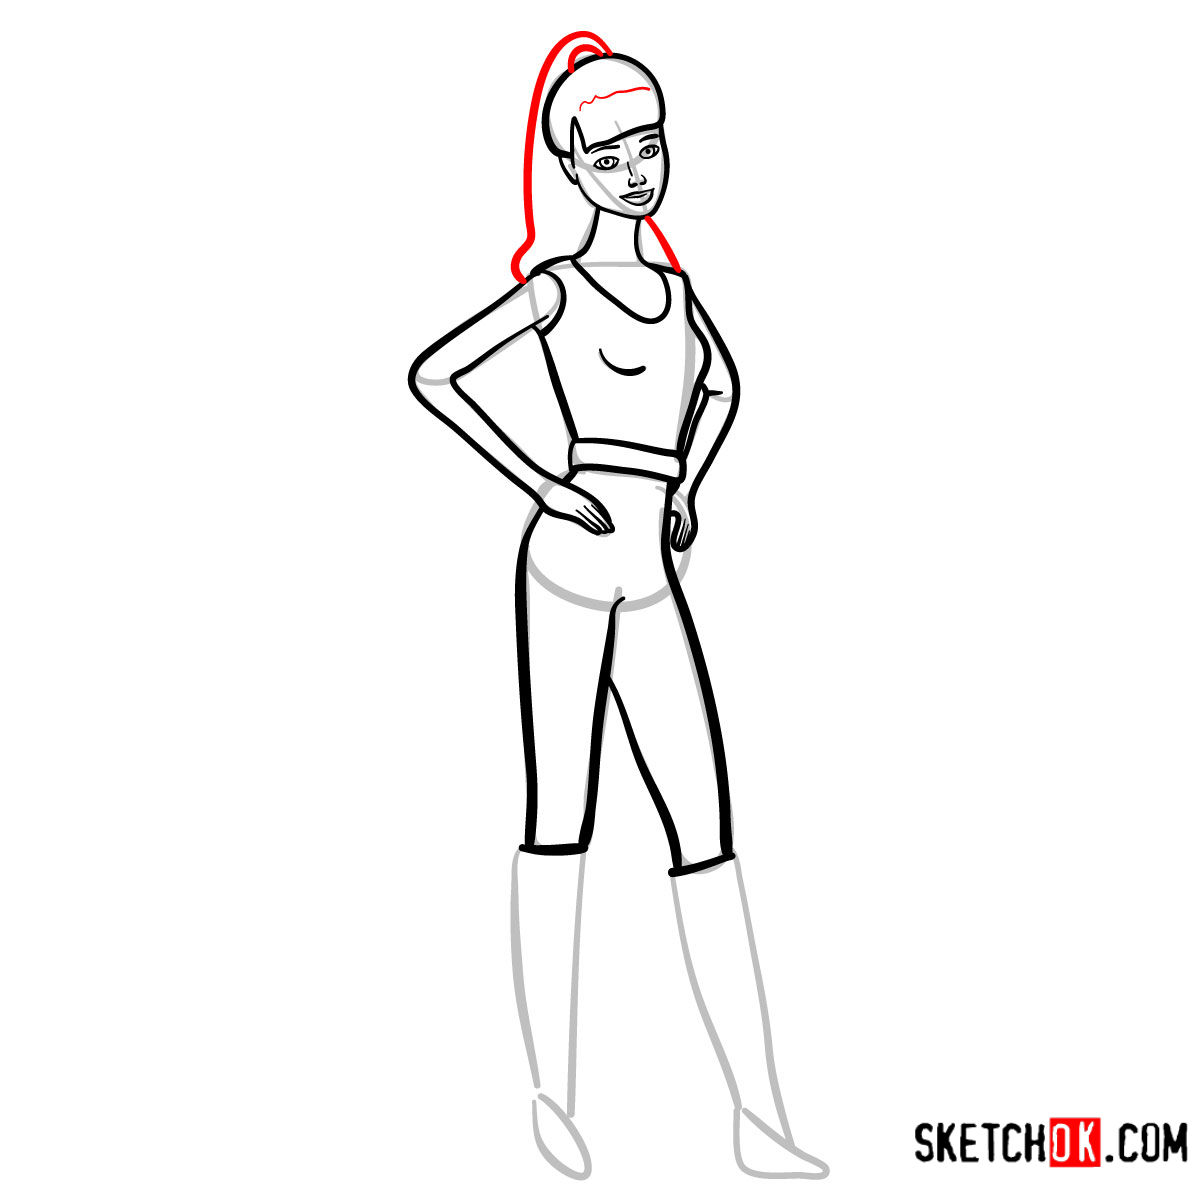 How to draw Barbie from Toy Story - step 10